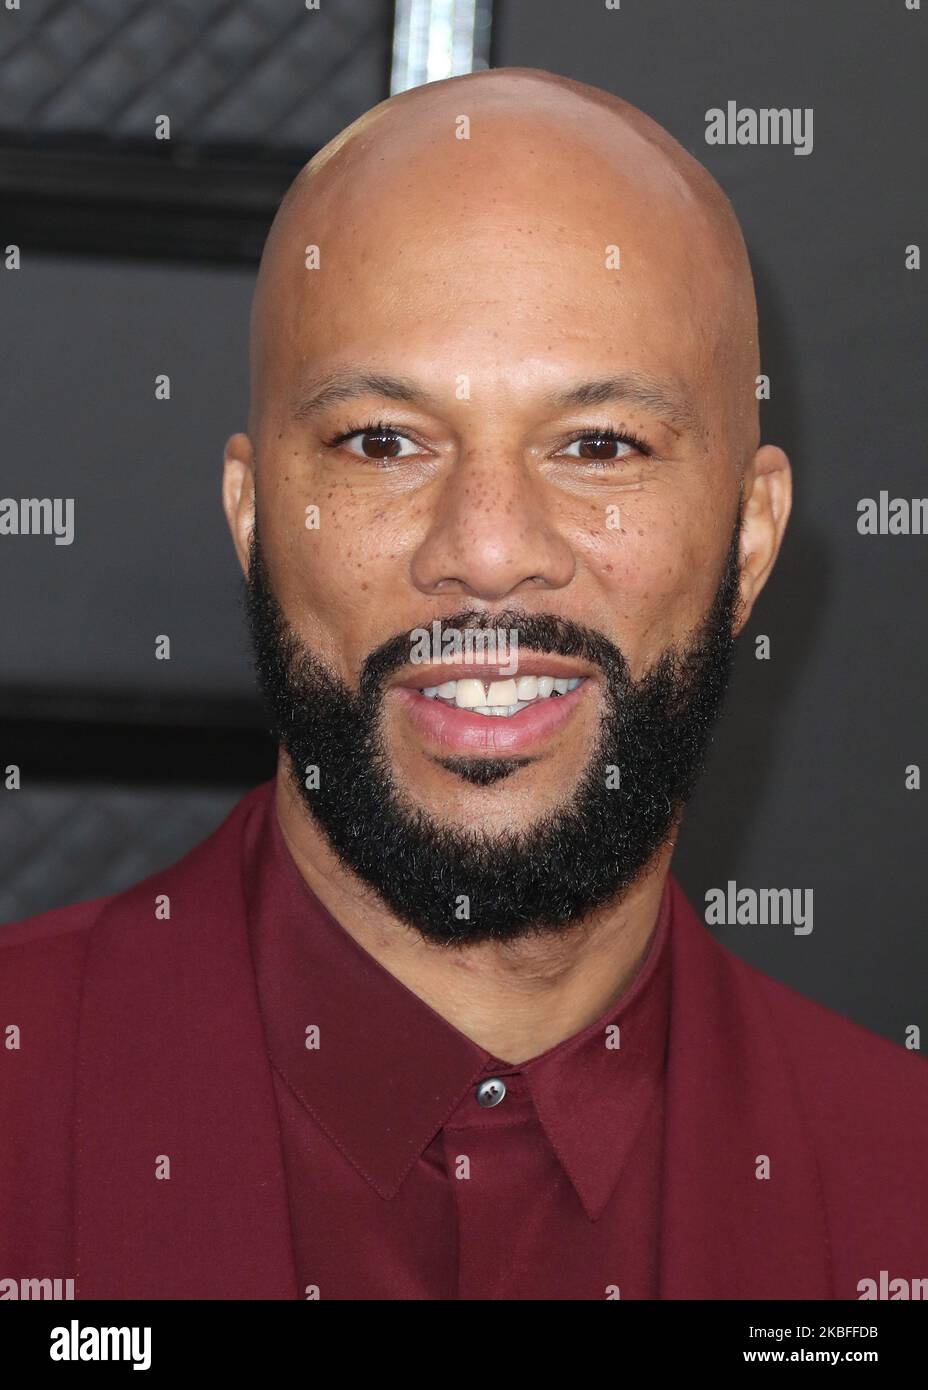 LOS ANGELES, CALIFORNIA, USA - JANUARY 26: Common arrives at the 62nd Annual GRAMMY Awards held at Staples Center on January 26, 2020 in Los Angeles, California, United States. (Photo by Xavier Collin/Image Press Agency/NurPhoto) Stock Photo